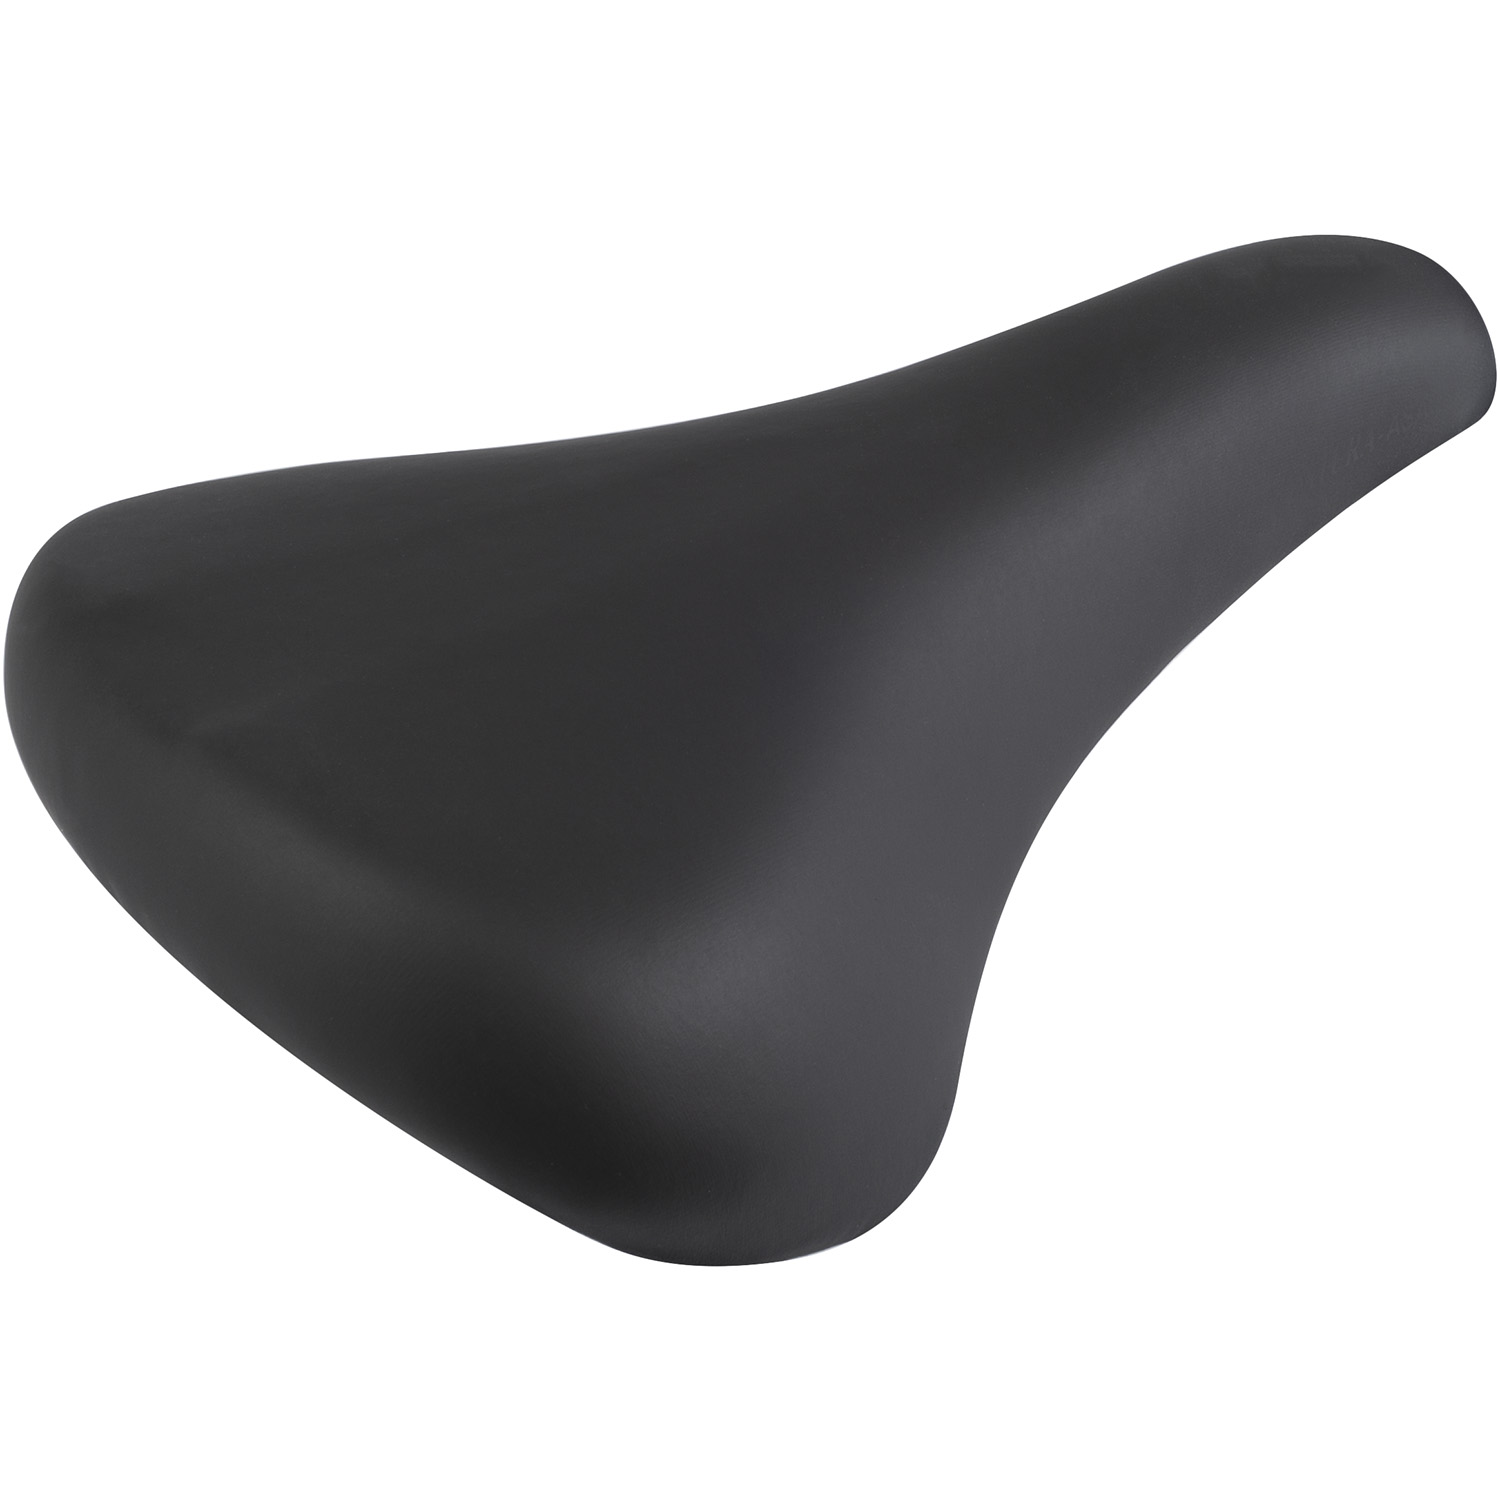 250141 – VENTURA Eco T & M trekking saddle – AVAILABLE IN SELECTED BIKE SHOPS